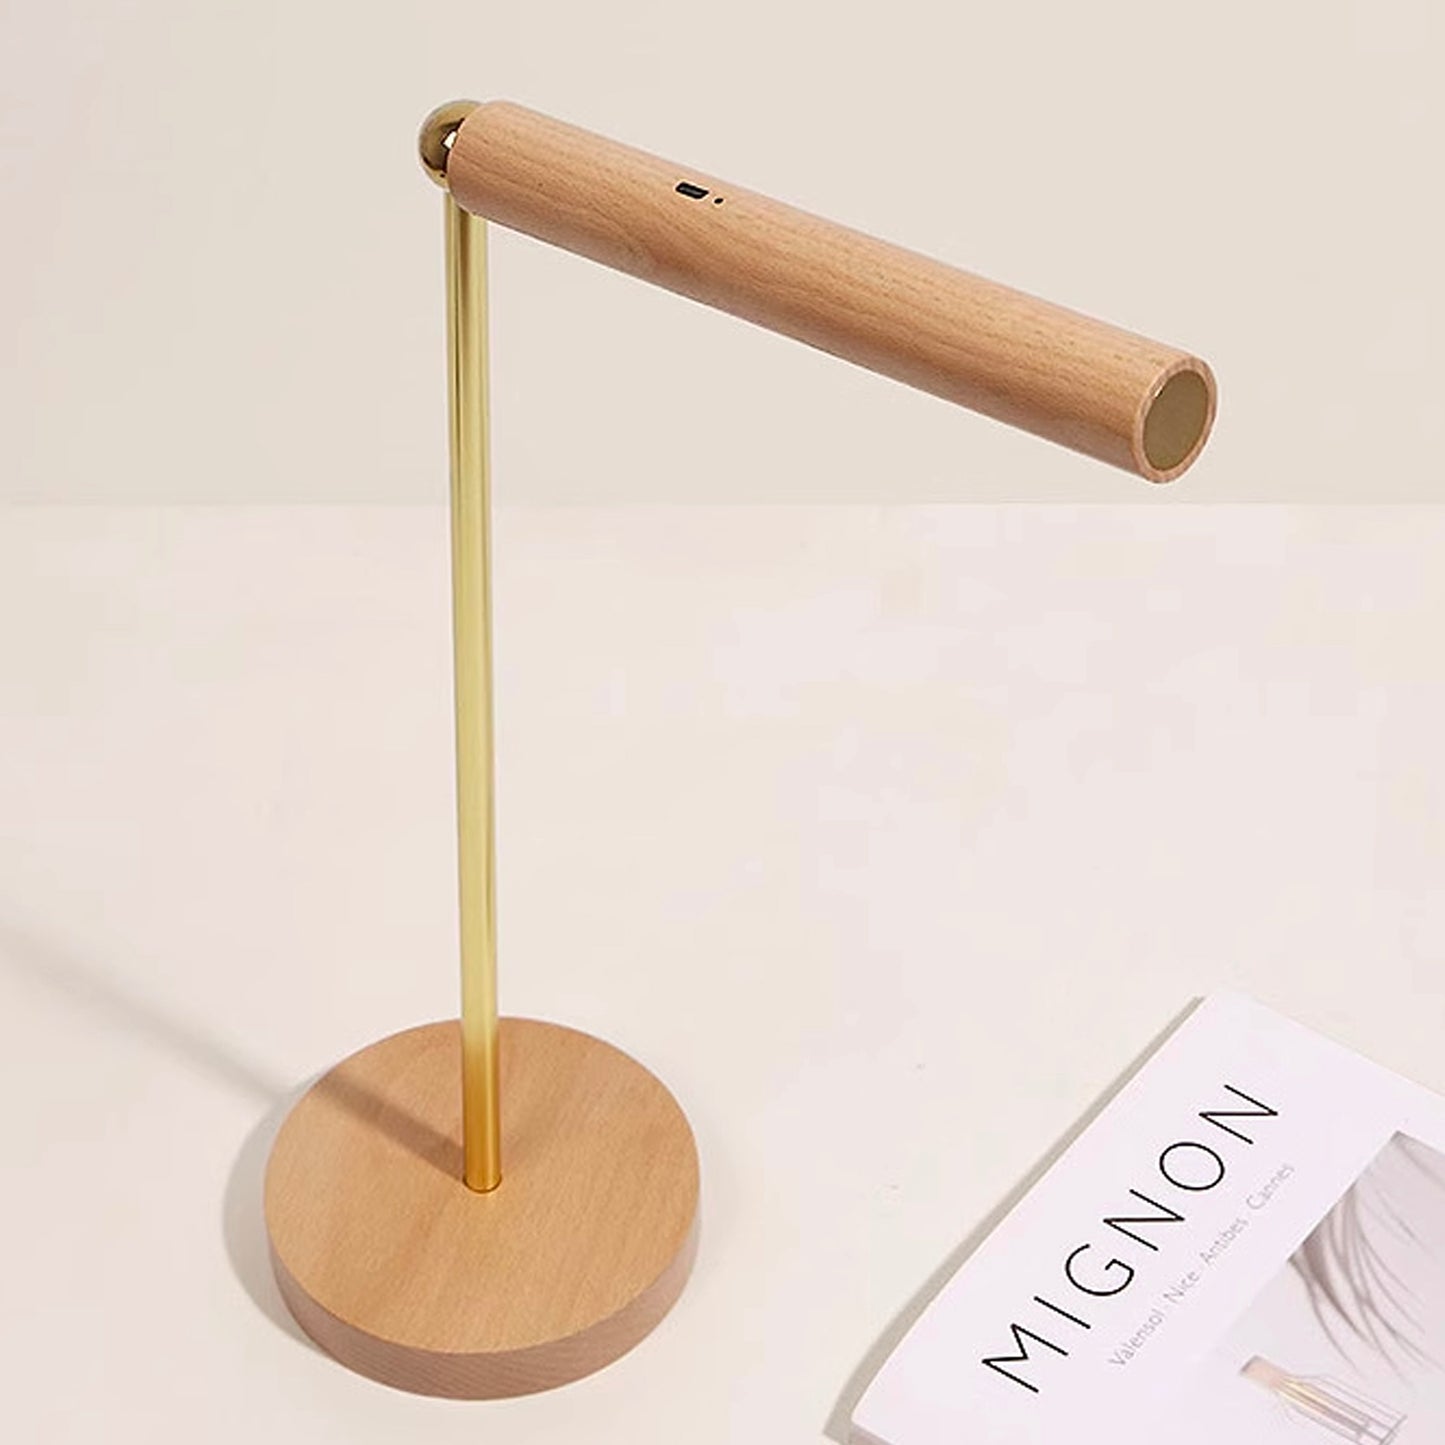 Dimmable Wooden Led Desk Lamp - USB Powered